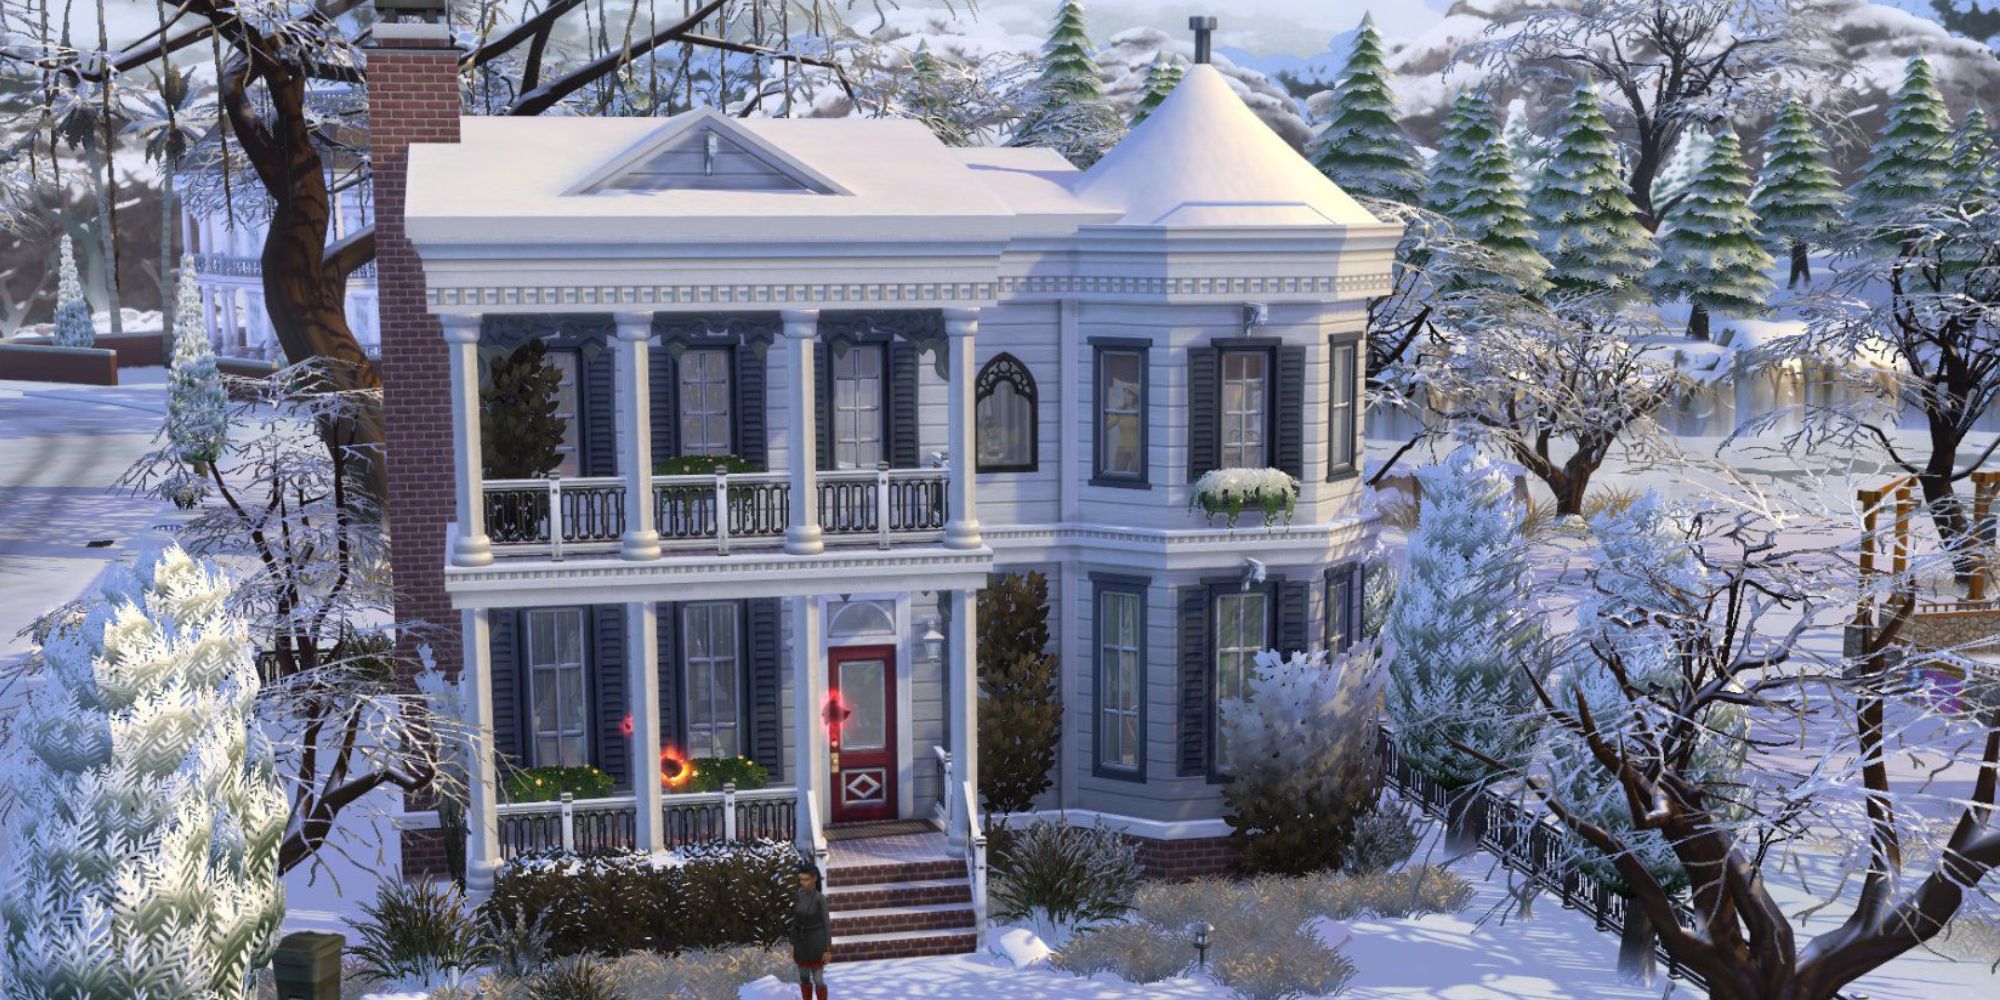 How To Find Or Build A Haunted House In The Sims 4